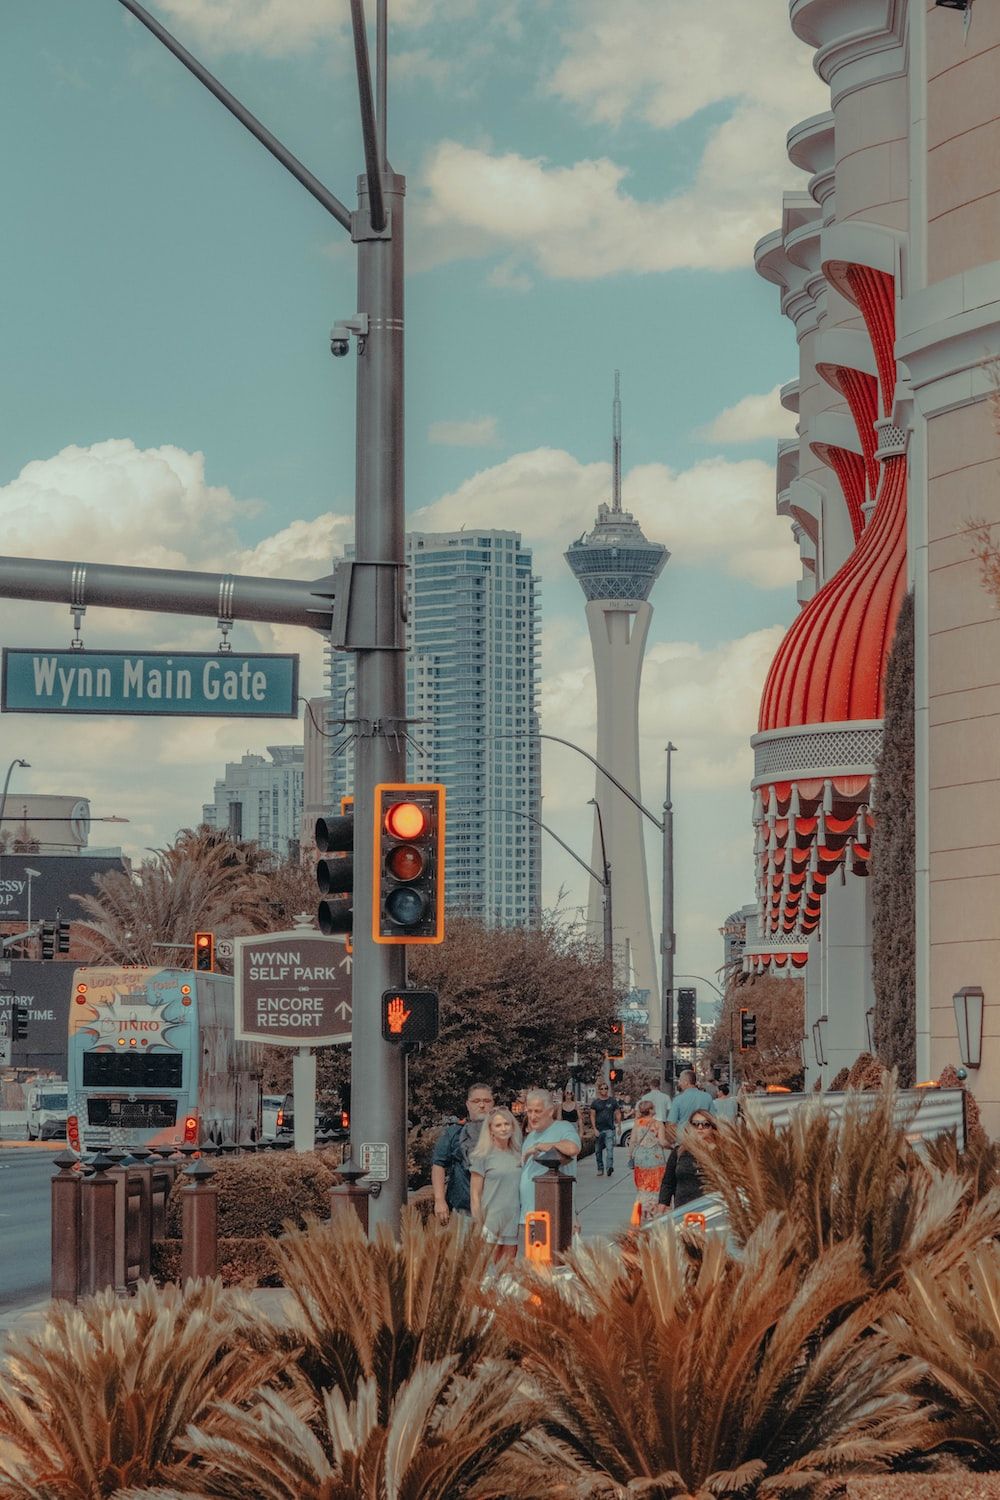 A red traffic light in a busy city street - Las Vegas